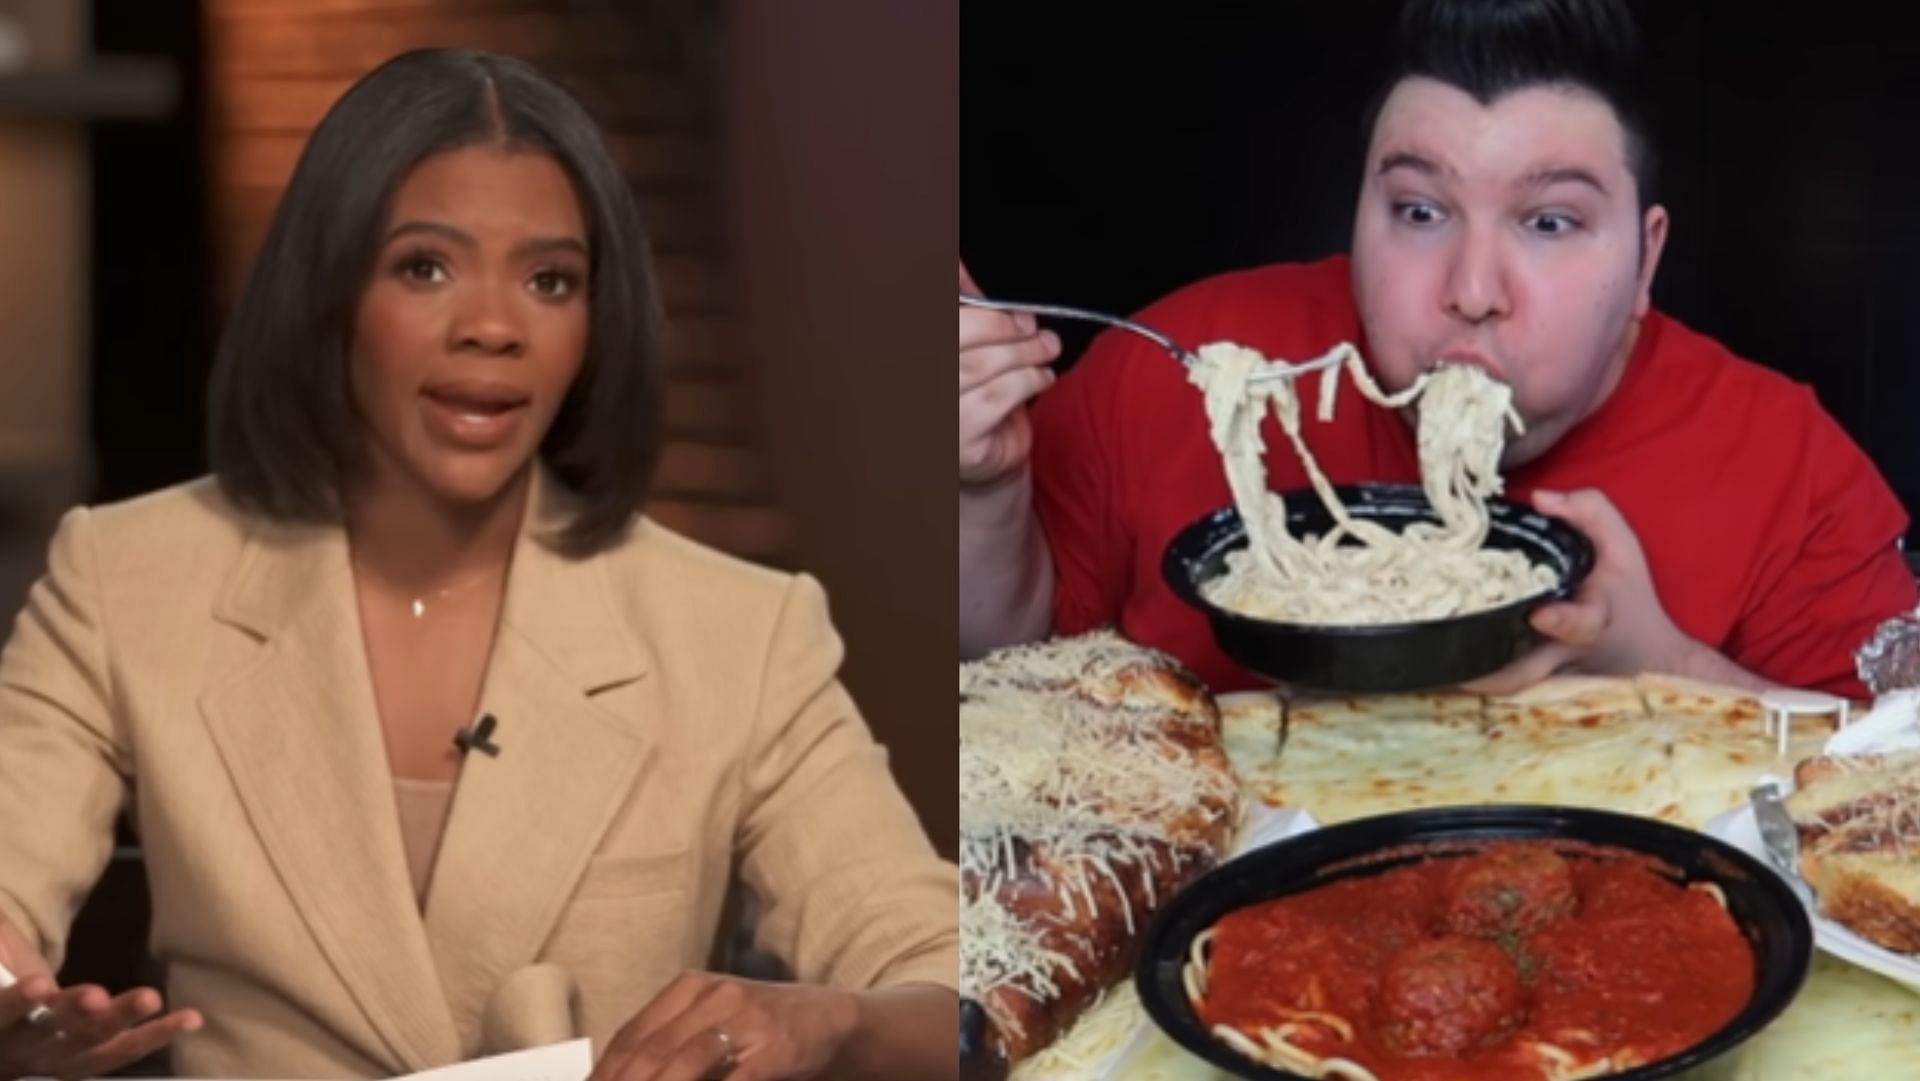 Candace Owens talks about YouTuber Nikocado Avocado in her latest podcast. (Image via YouTube/@CandaceOwensPodcast, @NikocadoAvocado)